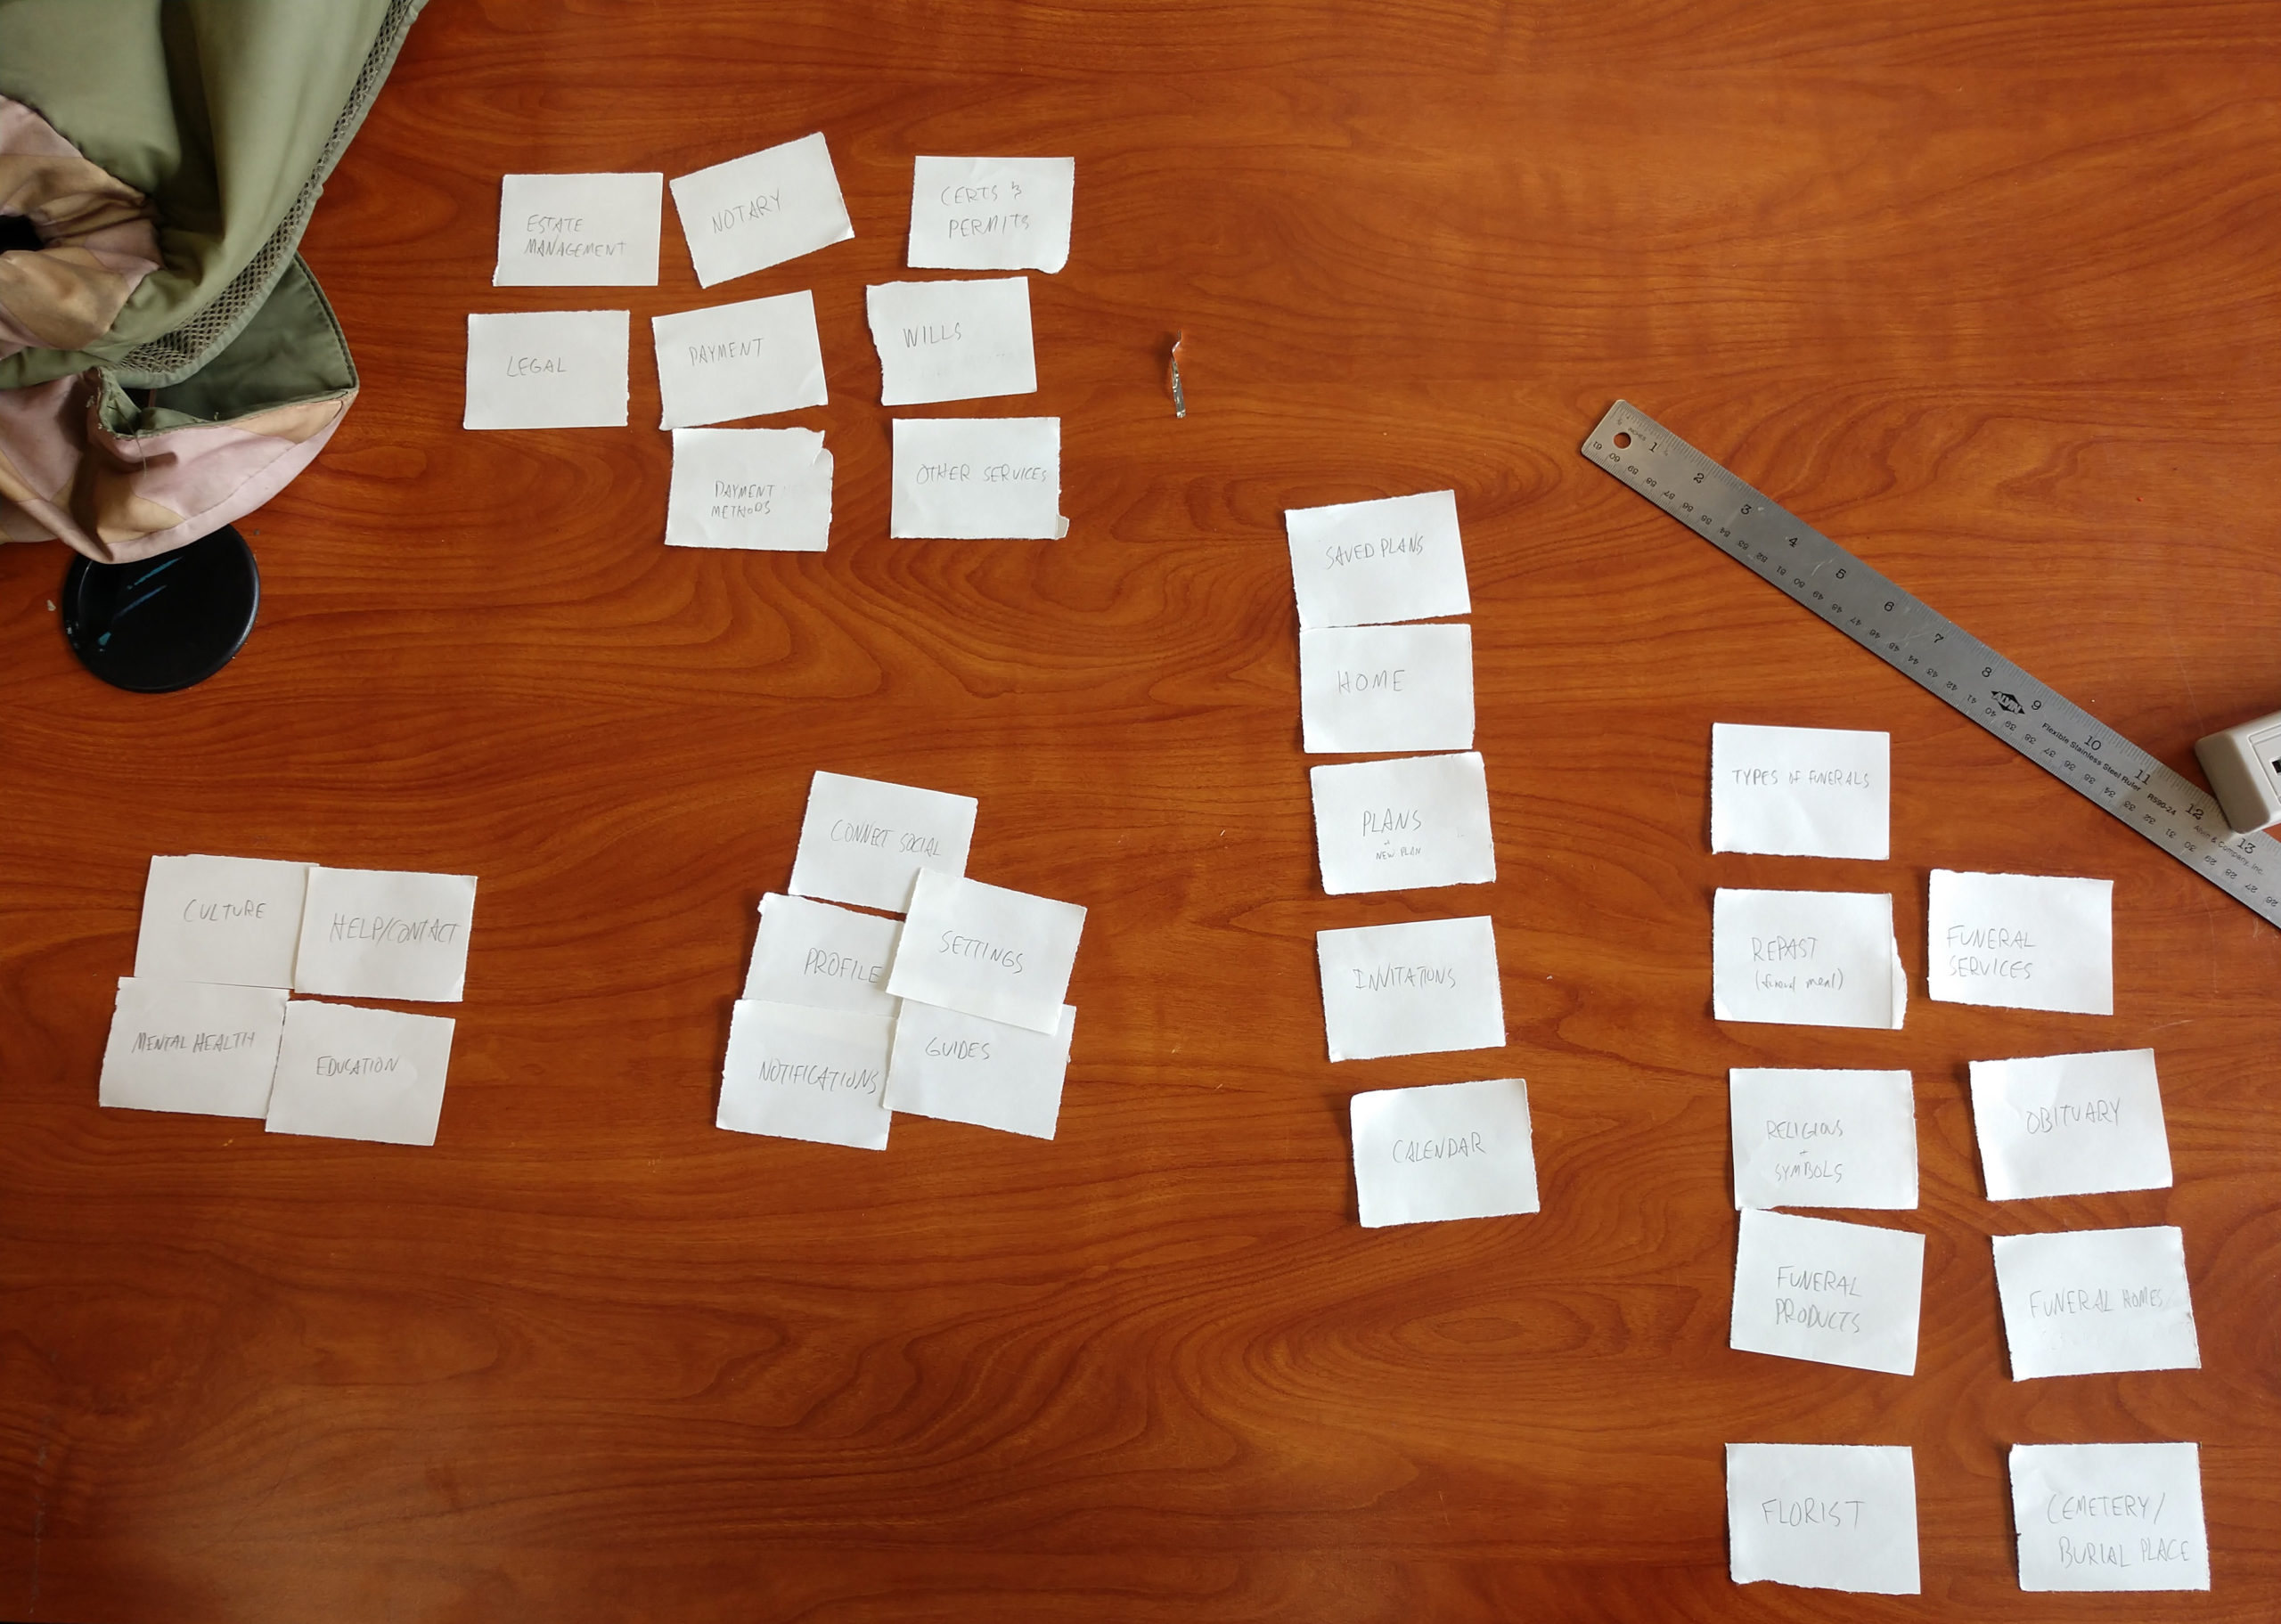 Card sorting exercise